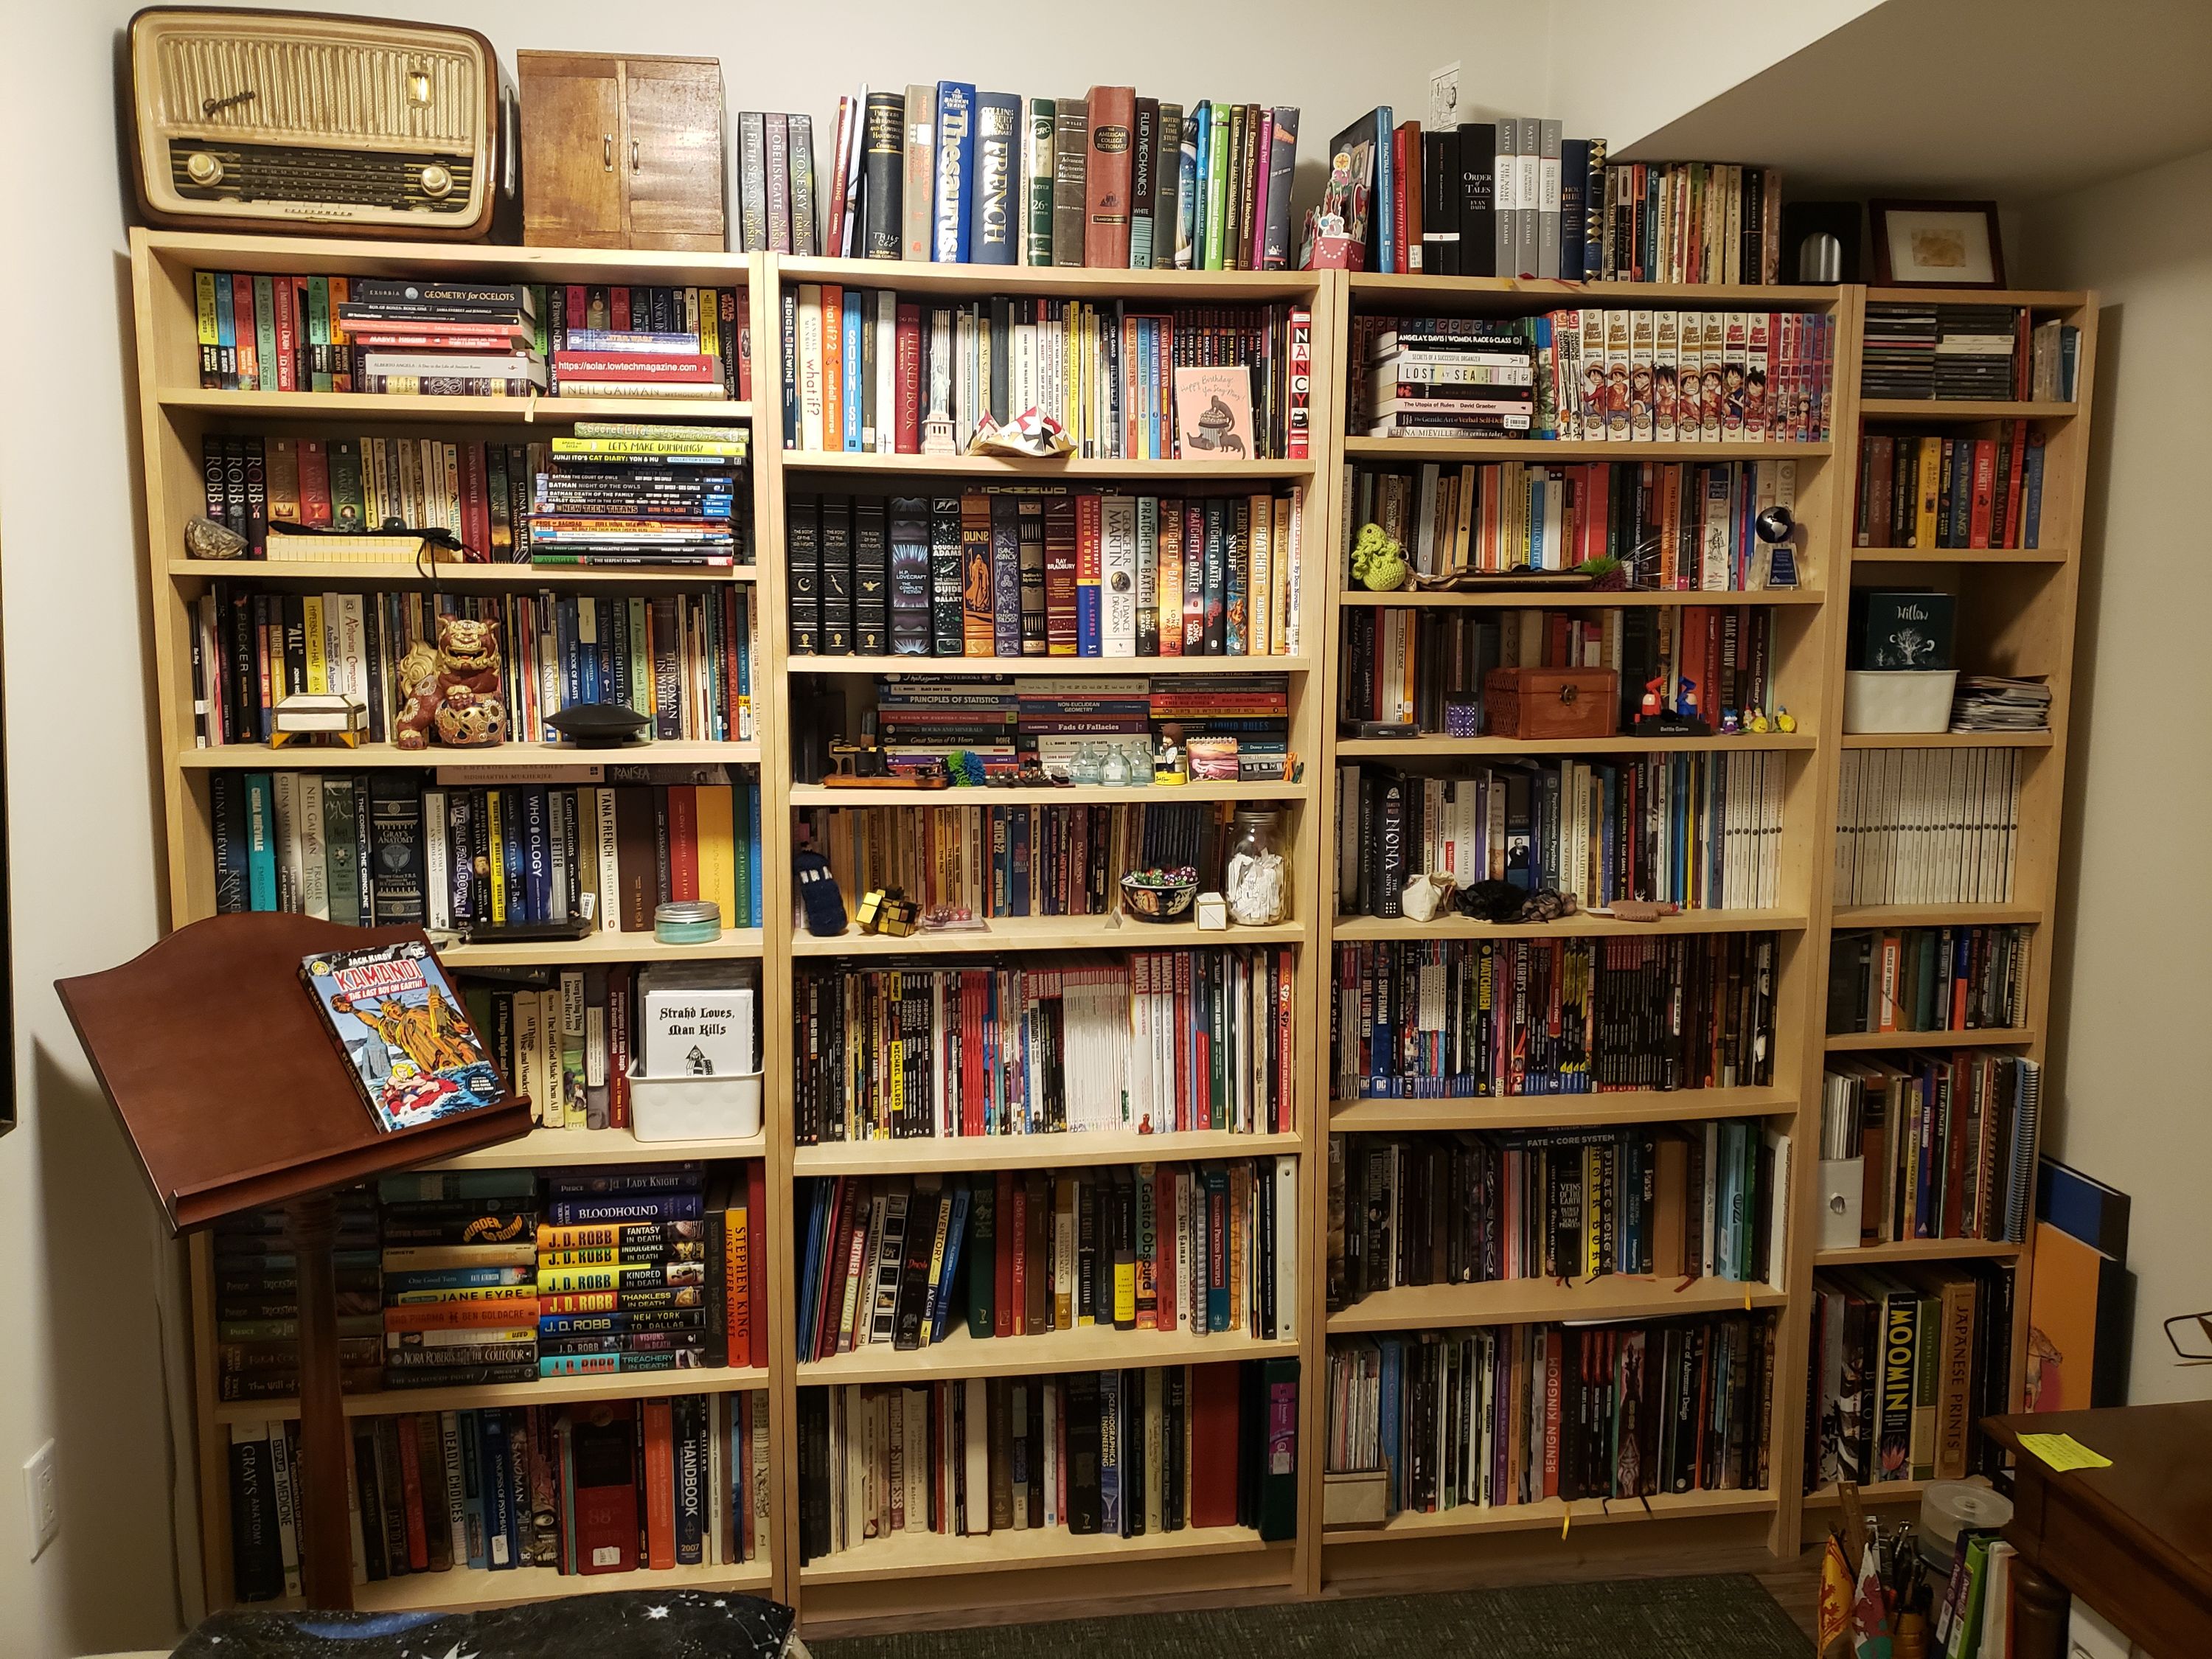 Three and a half full-height bookshelves are anchored against a wall, practically filling it. There are too many books on them and on top of them, stacked in no reasonable way, complete with more tchotchkies.